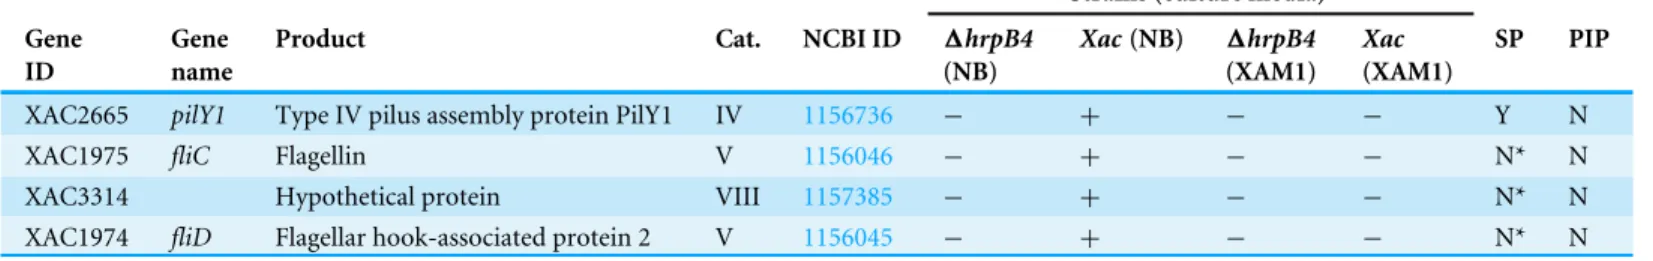 Table 4 Proteins expressed/detected only in wild type strain during non-infectious conditions.